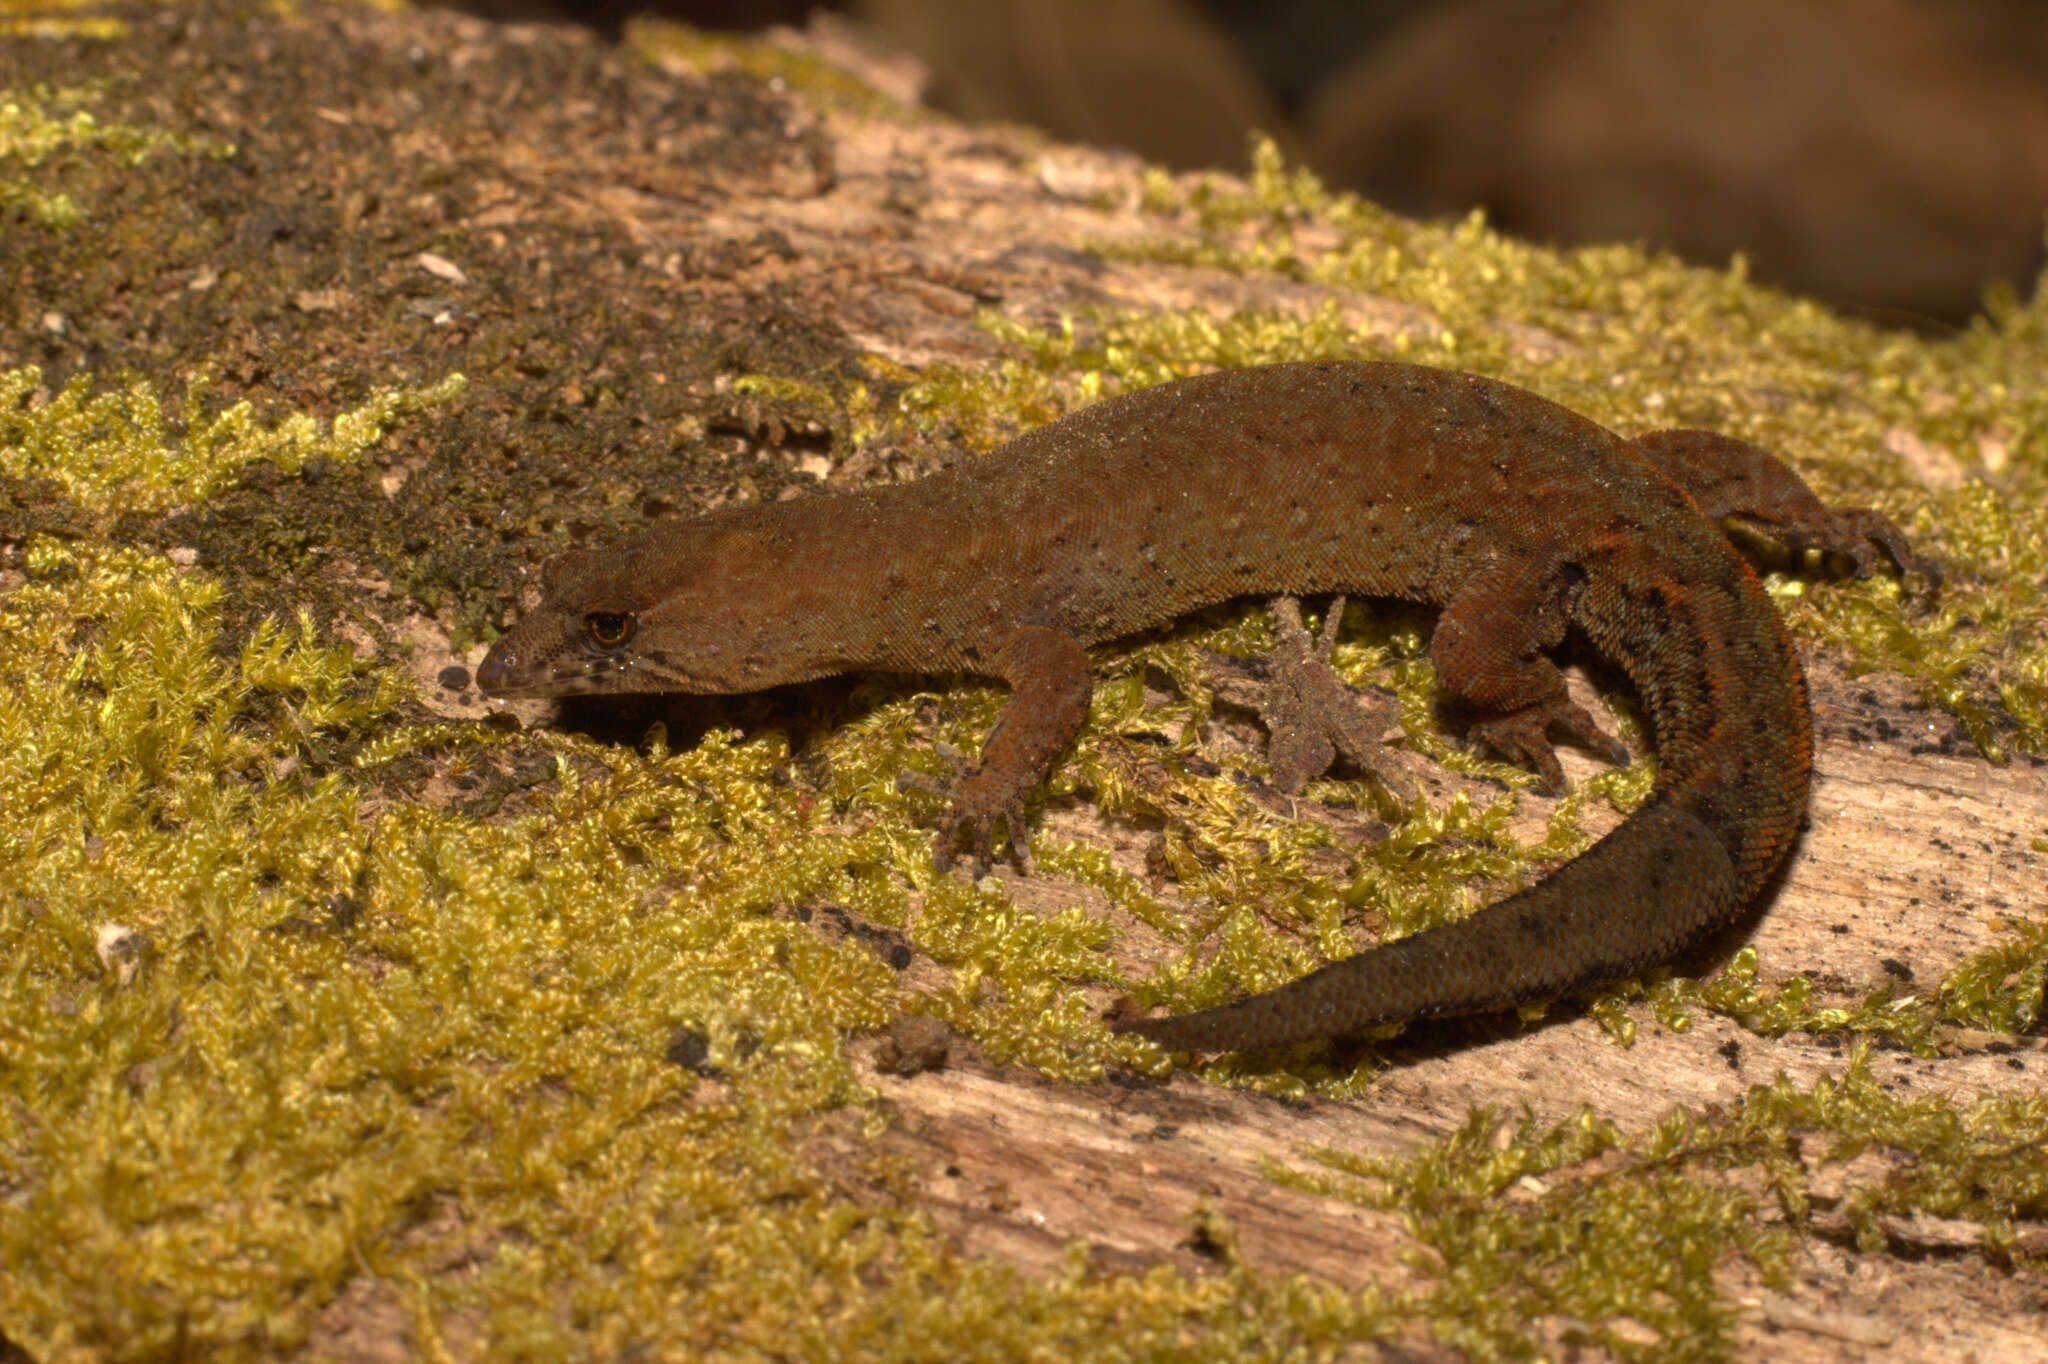 Image of Colombian Clawed Gecko